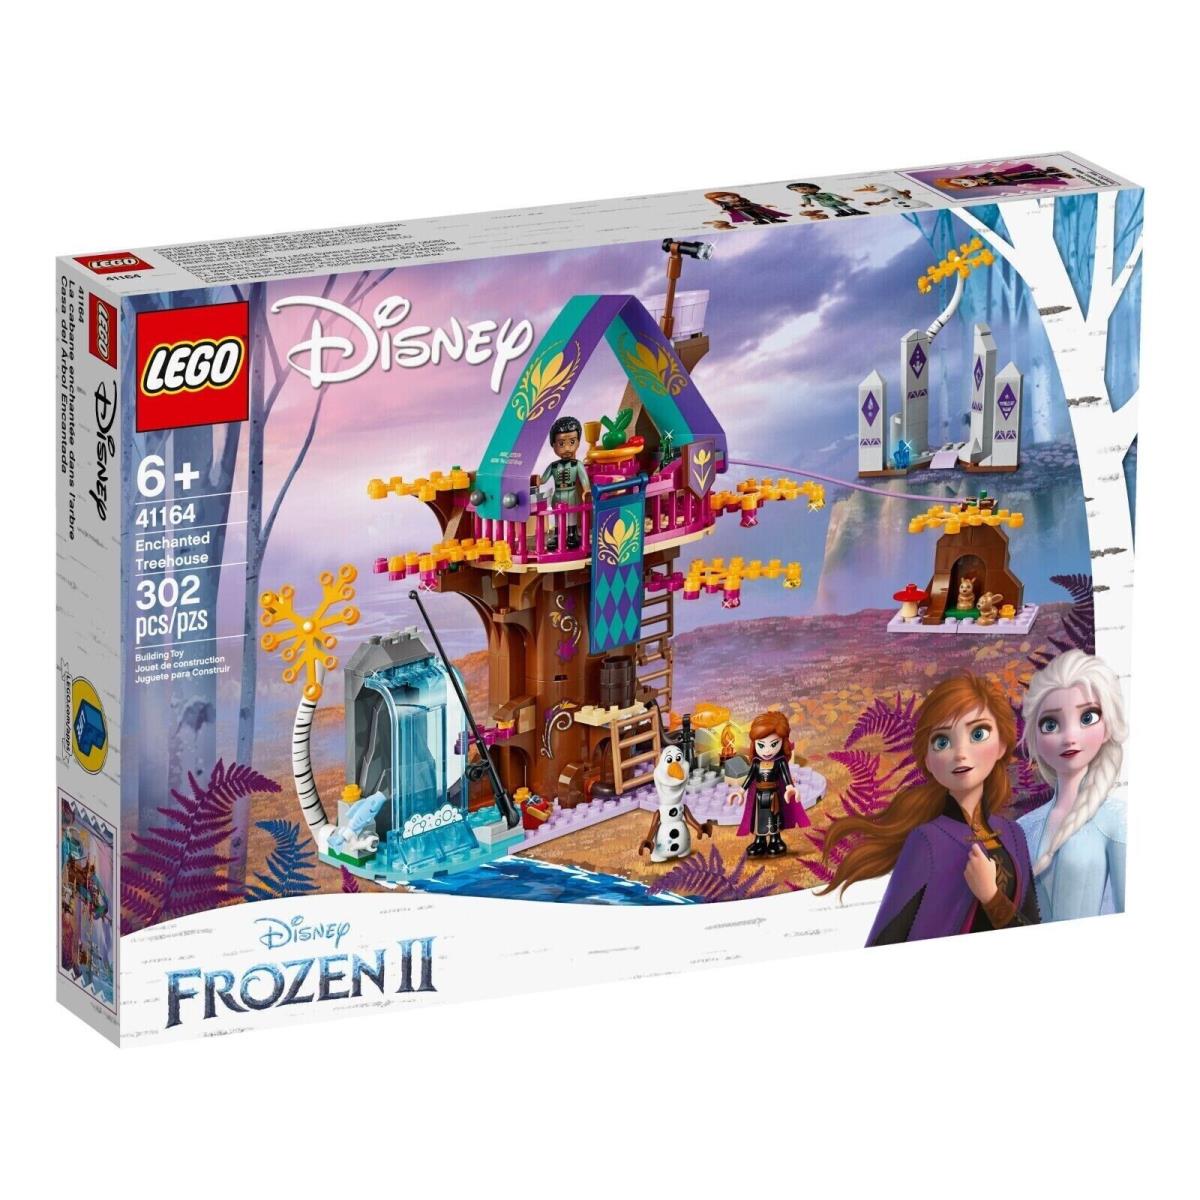 Wow Look LEGO-41164 Enchanted Tree House Frozen 2 and Bags